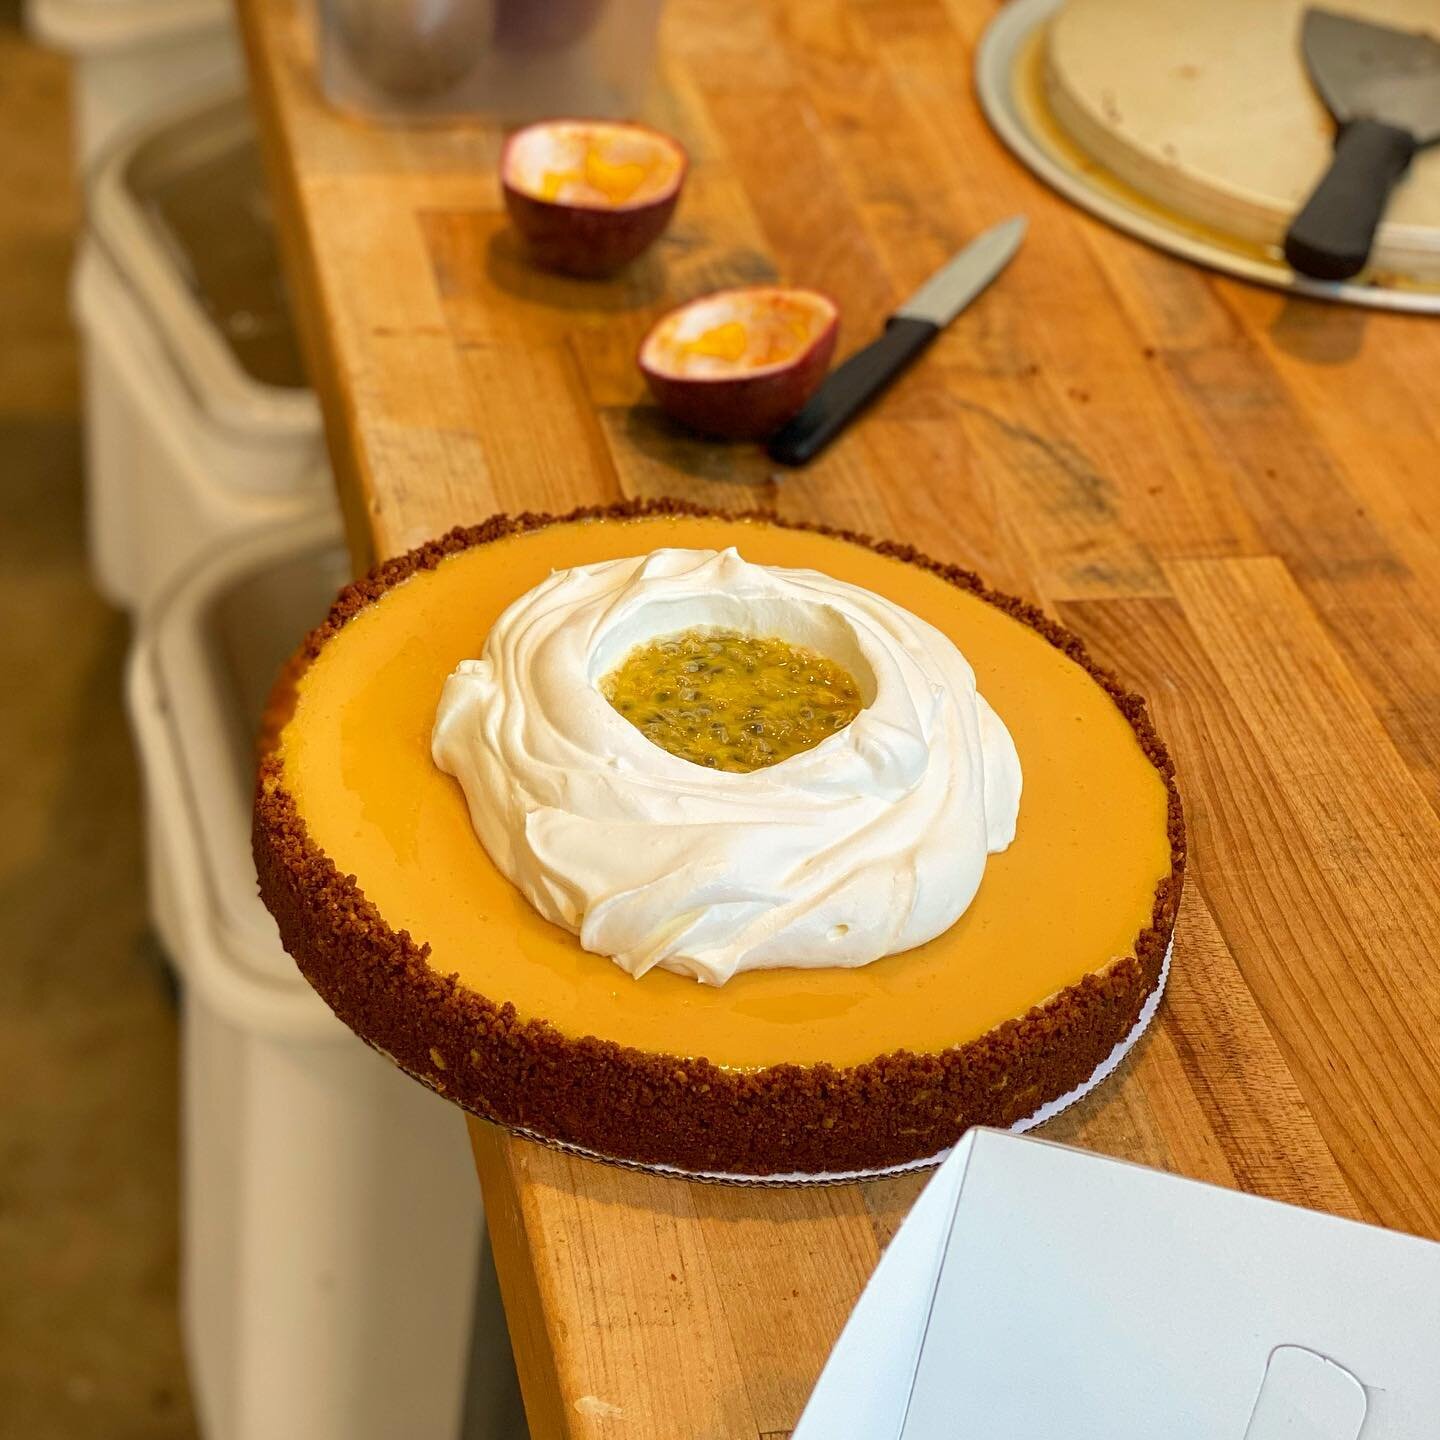 Passion fruit pie by the slice today and whole pies available for pre-order for your at-home holiday.  Email us info@doubtingthomas.la by December 19th. 

Passion fruit custard is baked in a macadamia nut graham crust.  But it&rsquo;s when our scratc